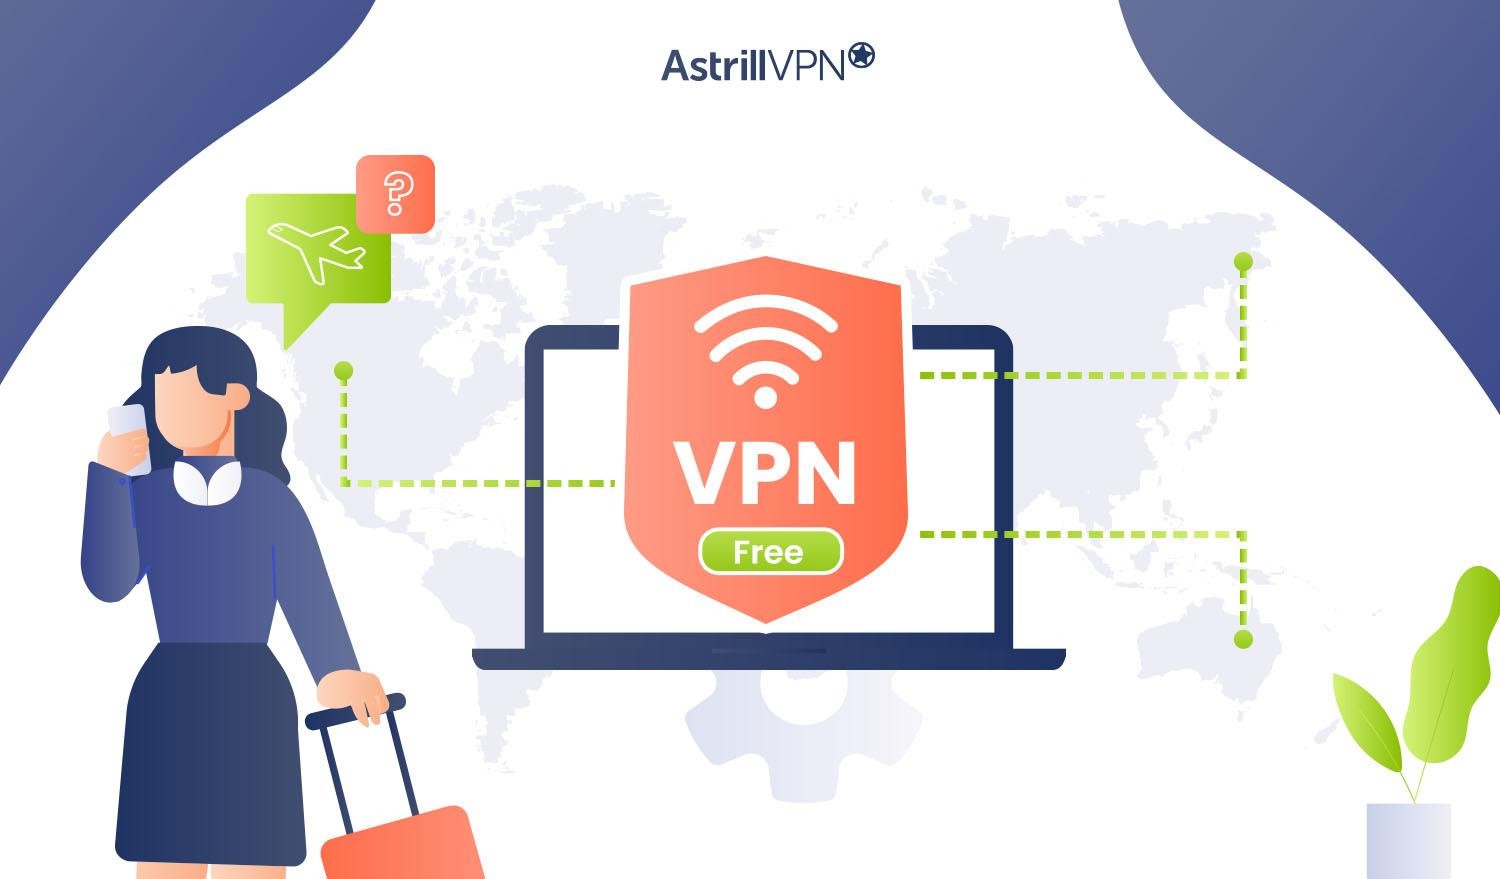 Can I use a free VPN while traveling abroad